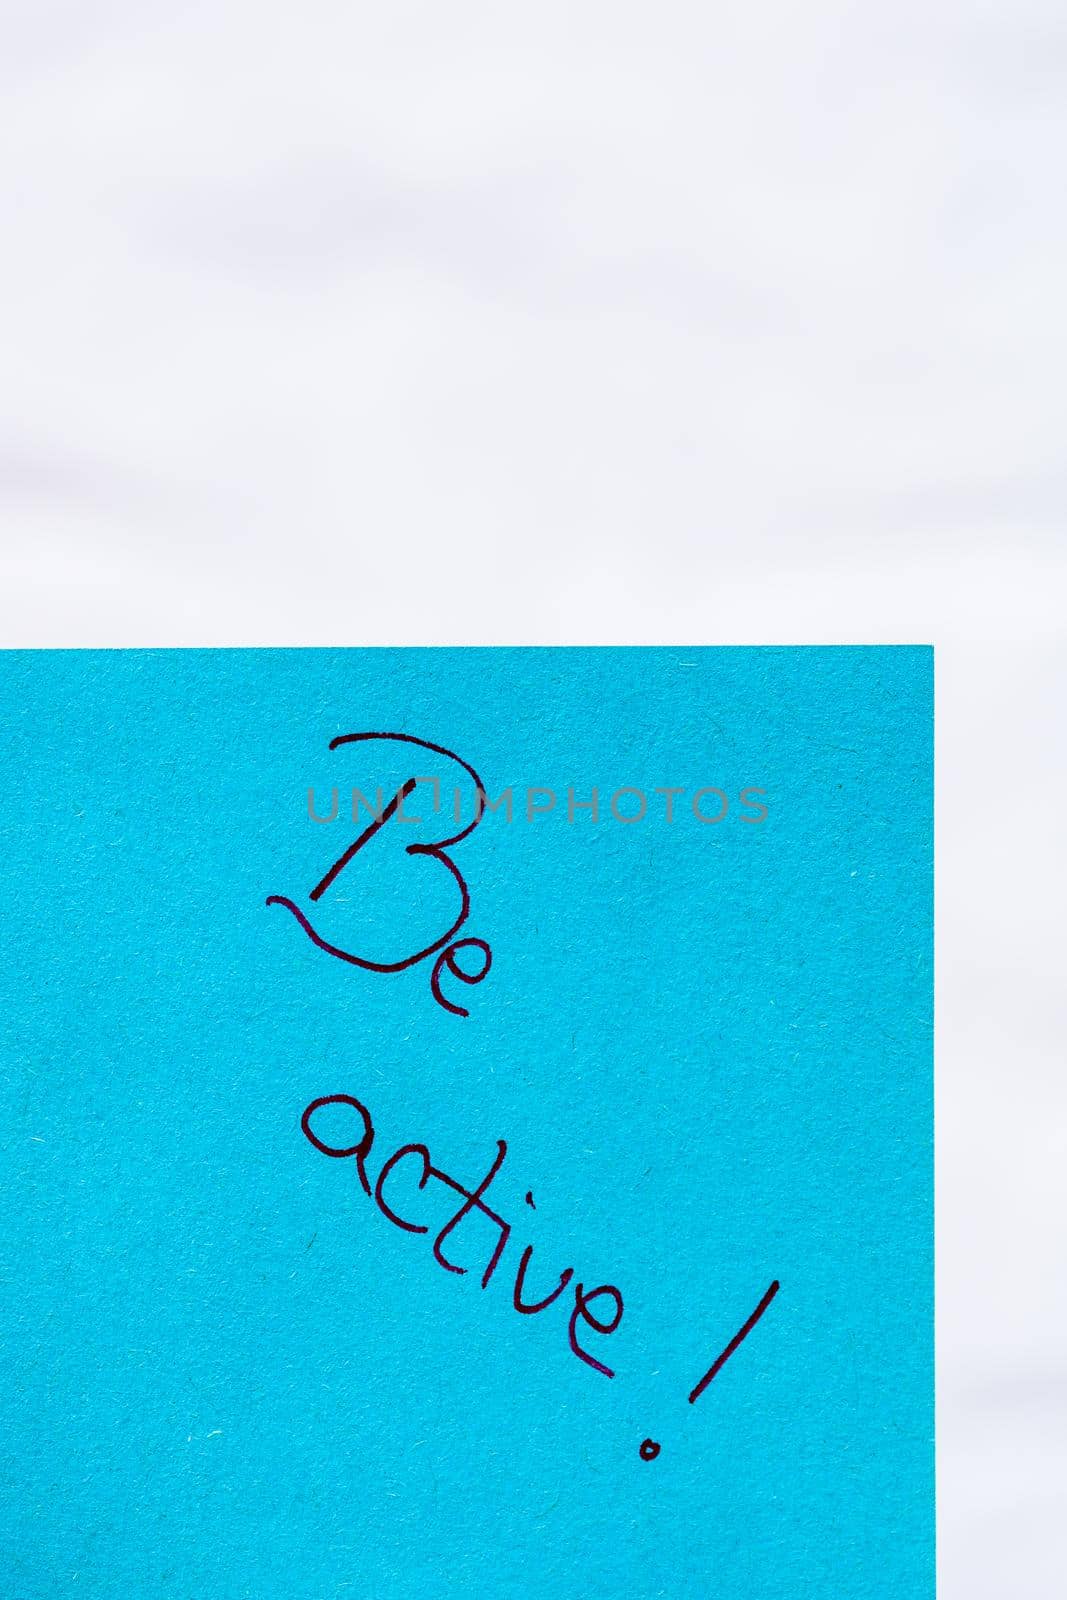 Be active handwriting text close up isolated on blue paper with copy space. Writing text on memo post reminder by vladispas